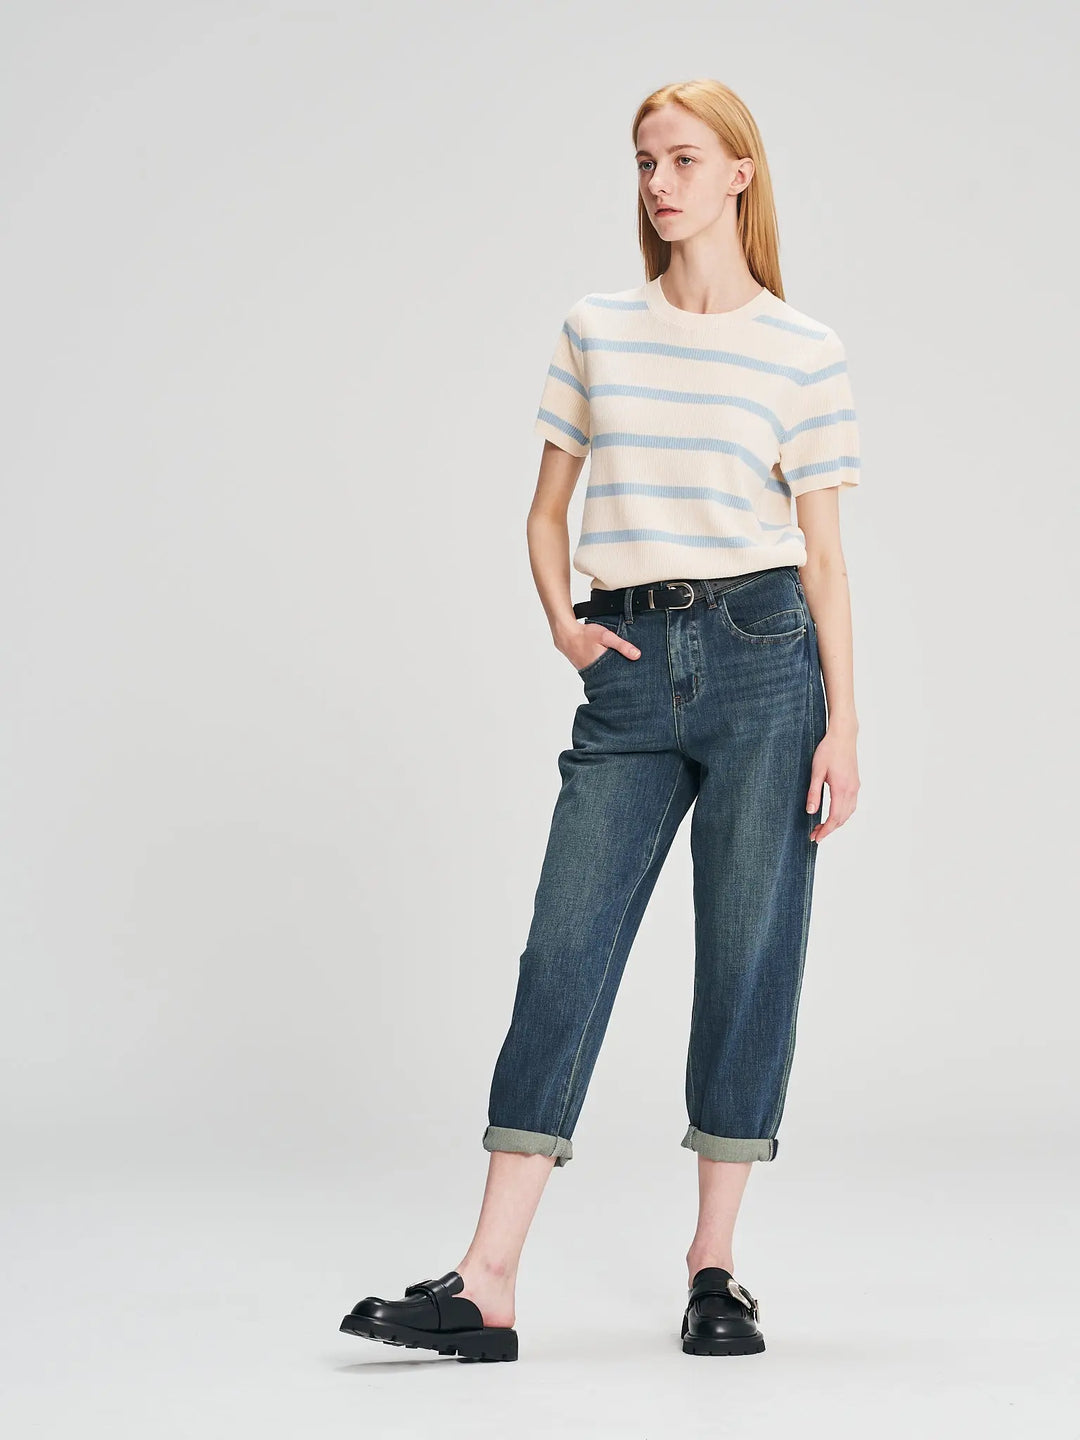 An image of a  Blue-One-Size 25175 Basic Stripe T-Shirt by  Mirra Masa